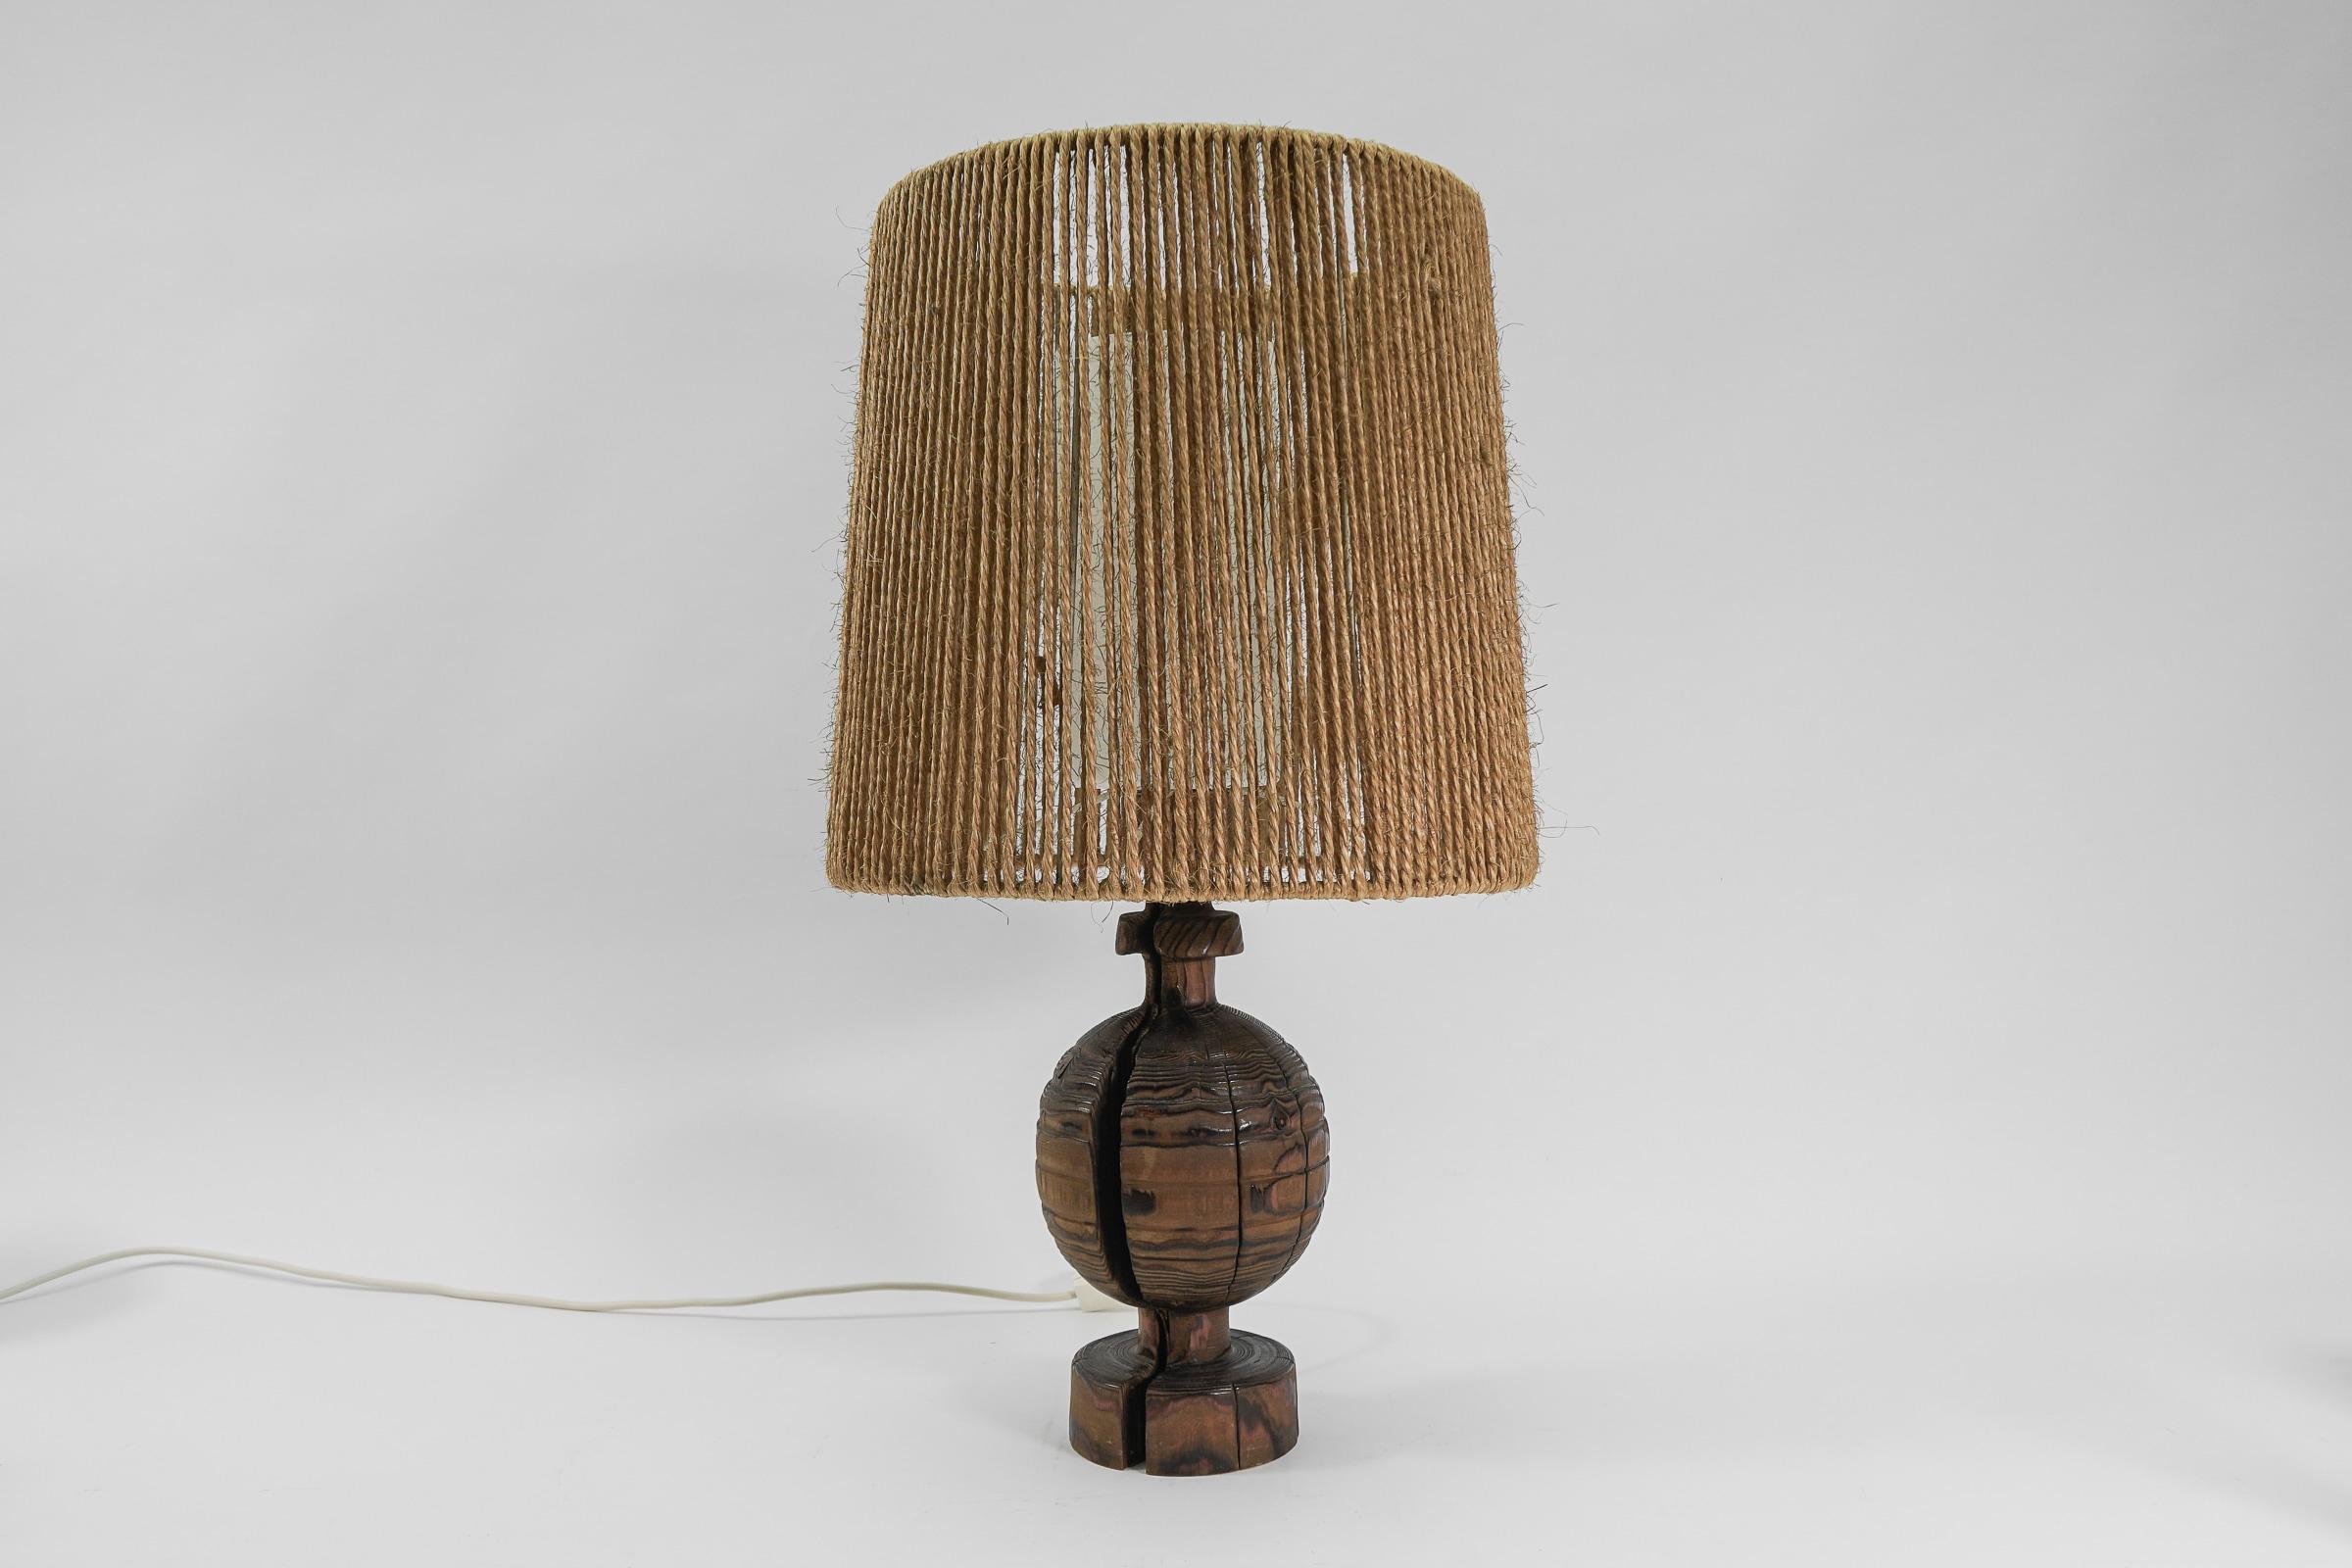 French Provincial Scandinavian Handmade Mid-Century Modern Wood Table Lamp, 1960s For Sale